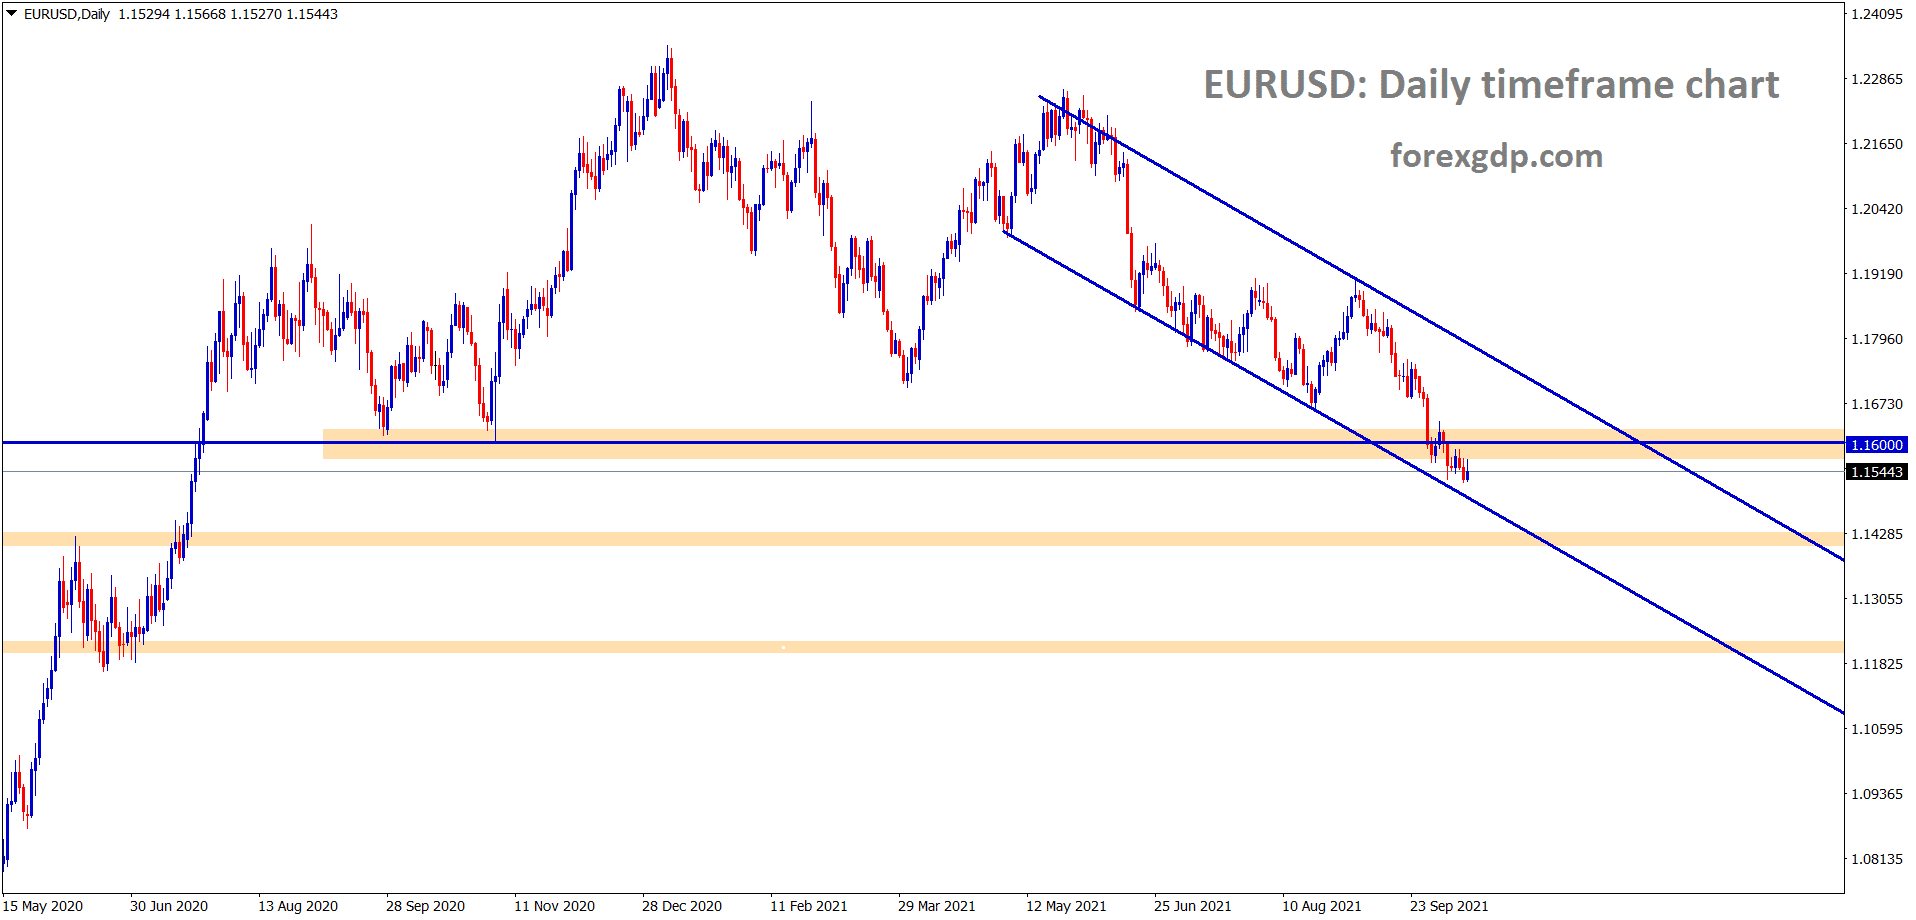 EURUSD is consolidating at the support and the lower low level of the descending channel for a long time